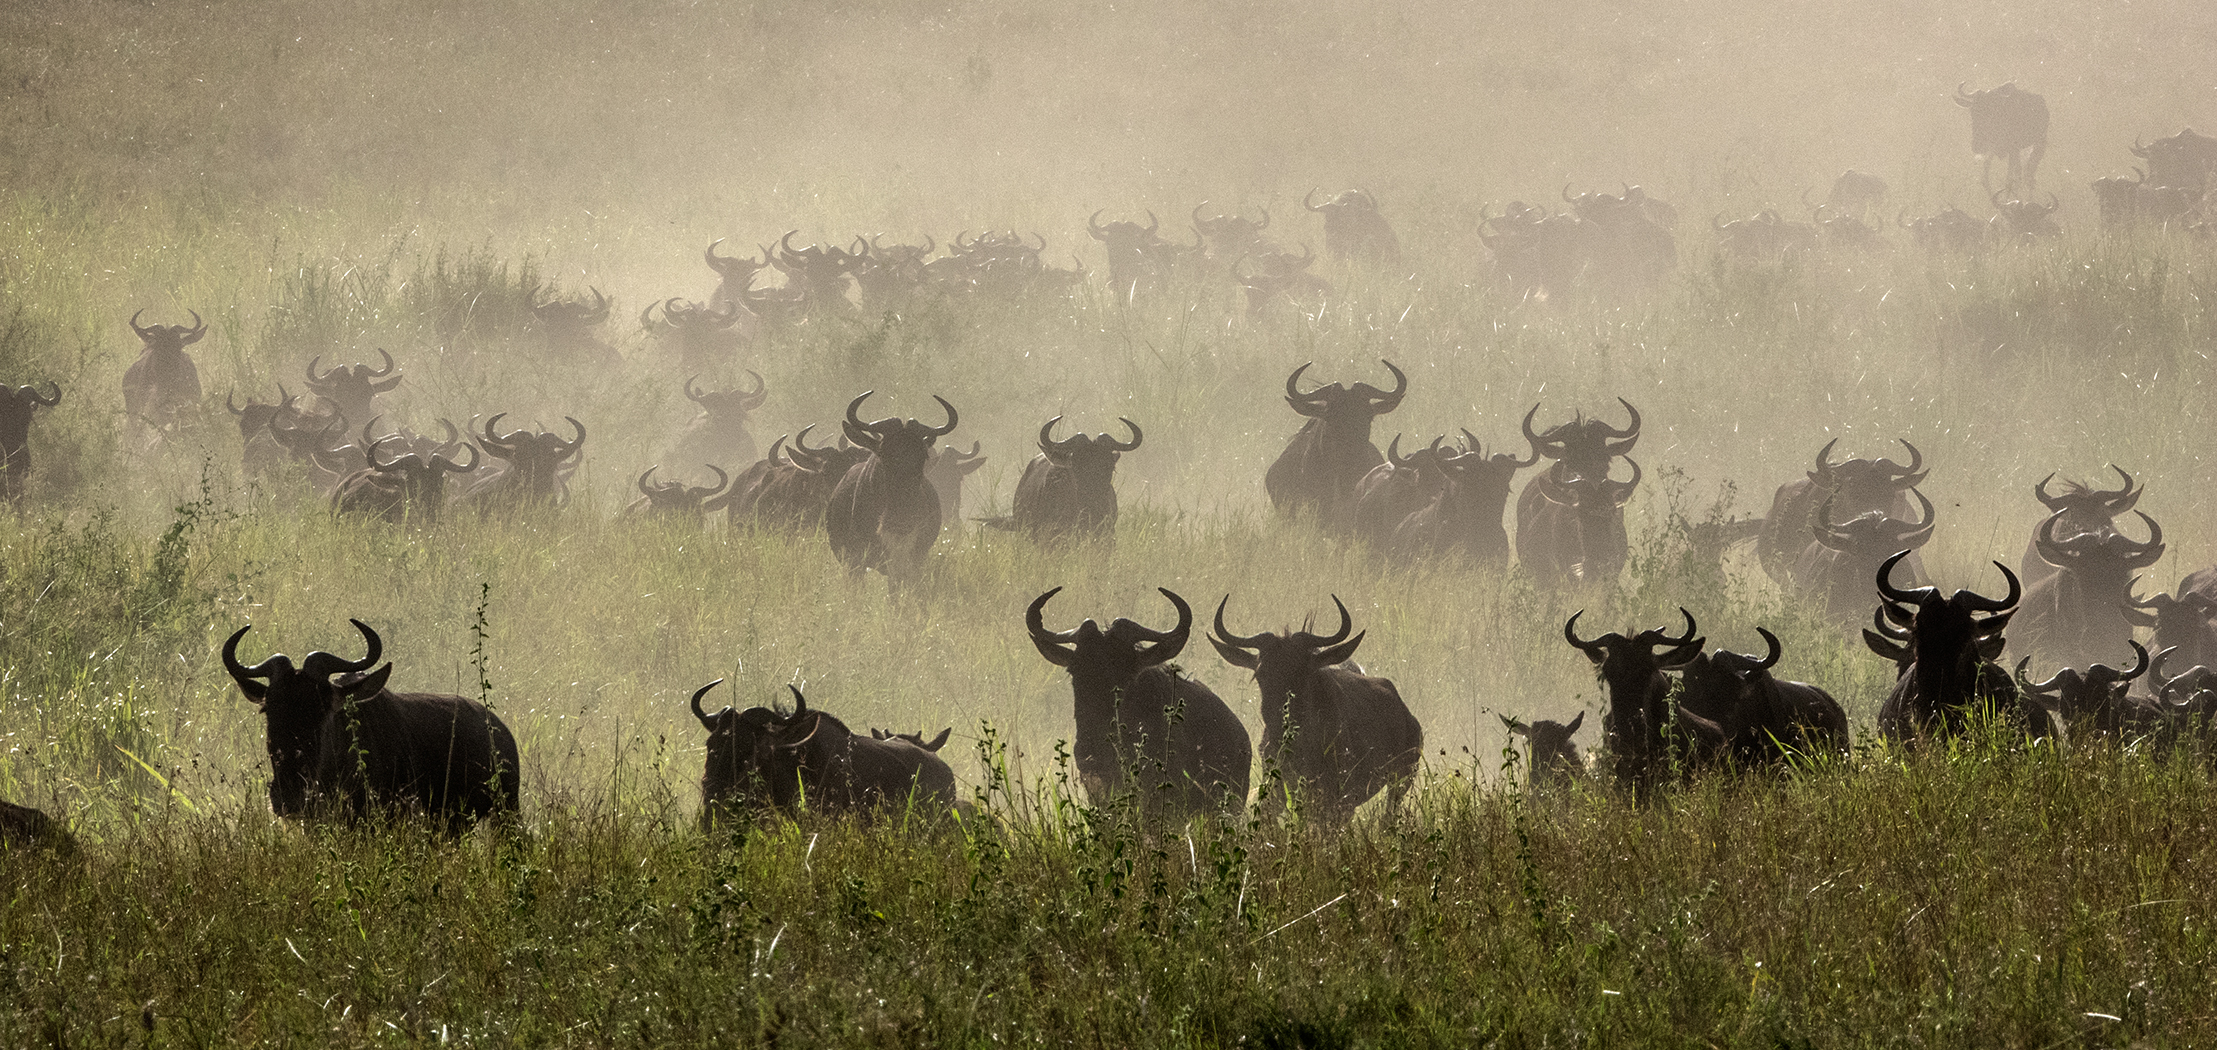 Wildbeest migration in the Serengeti of Tanzania